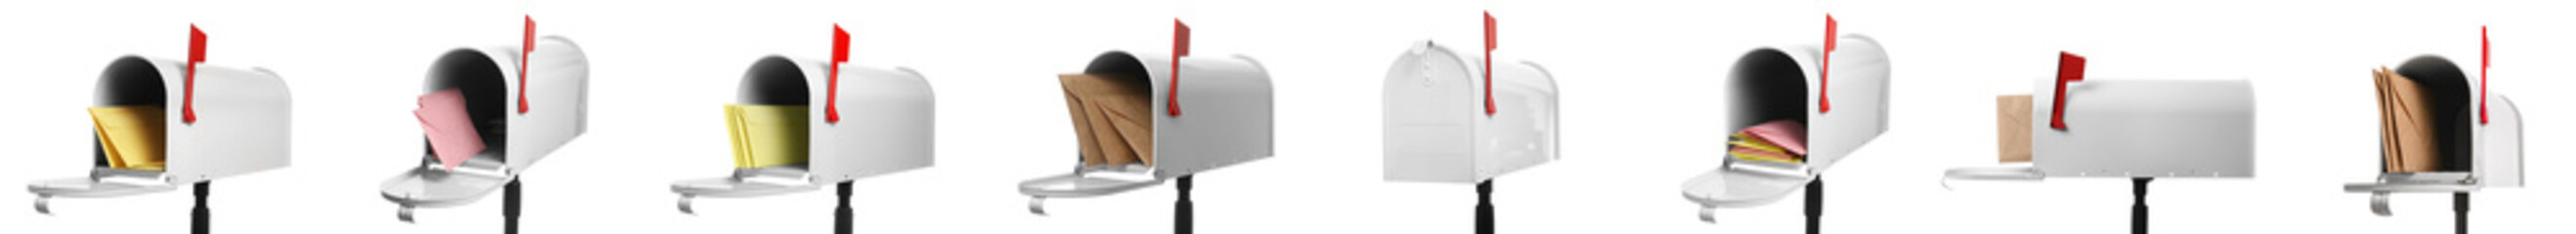 Set of mail boxes on white background